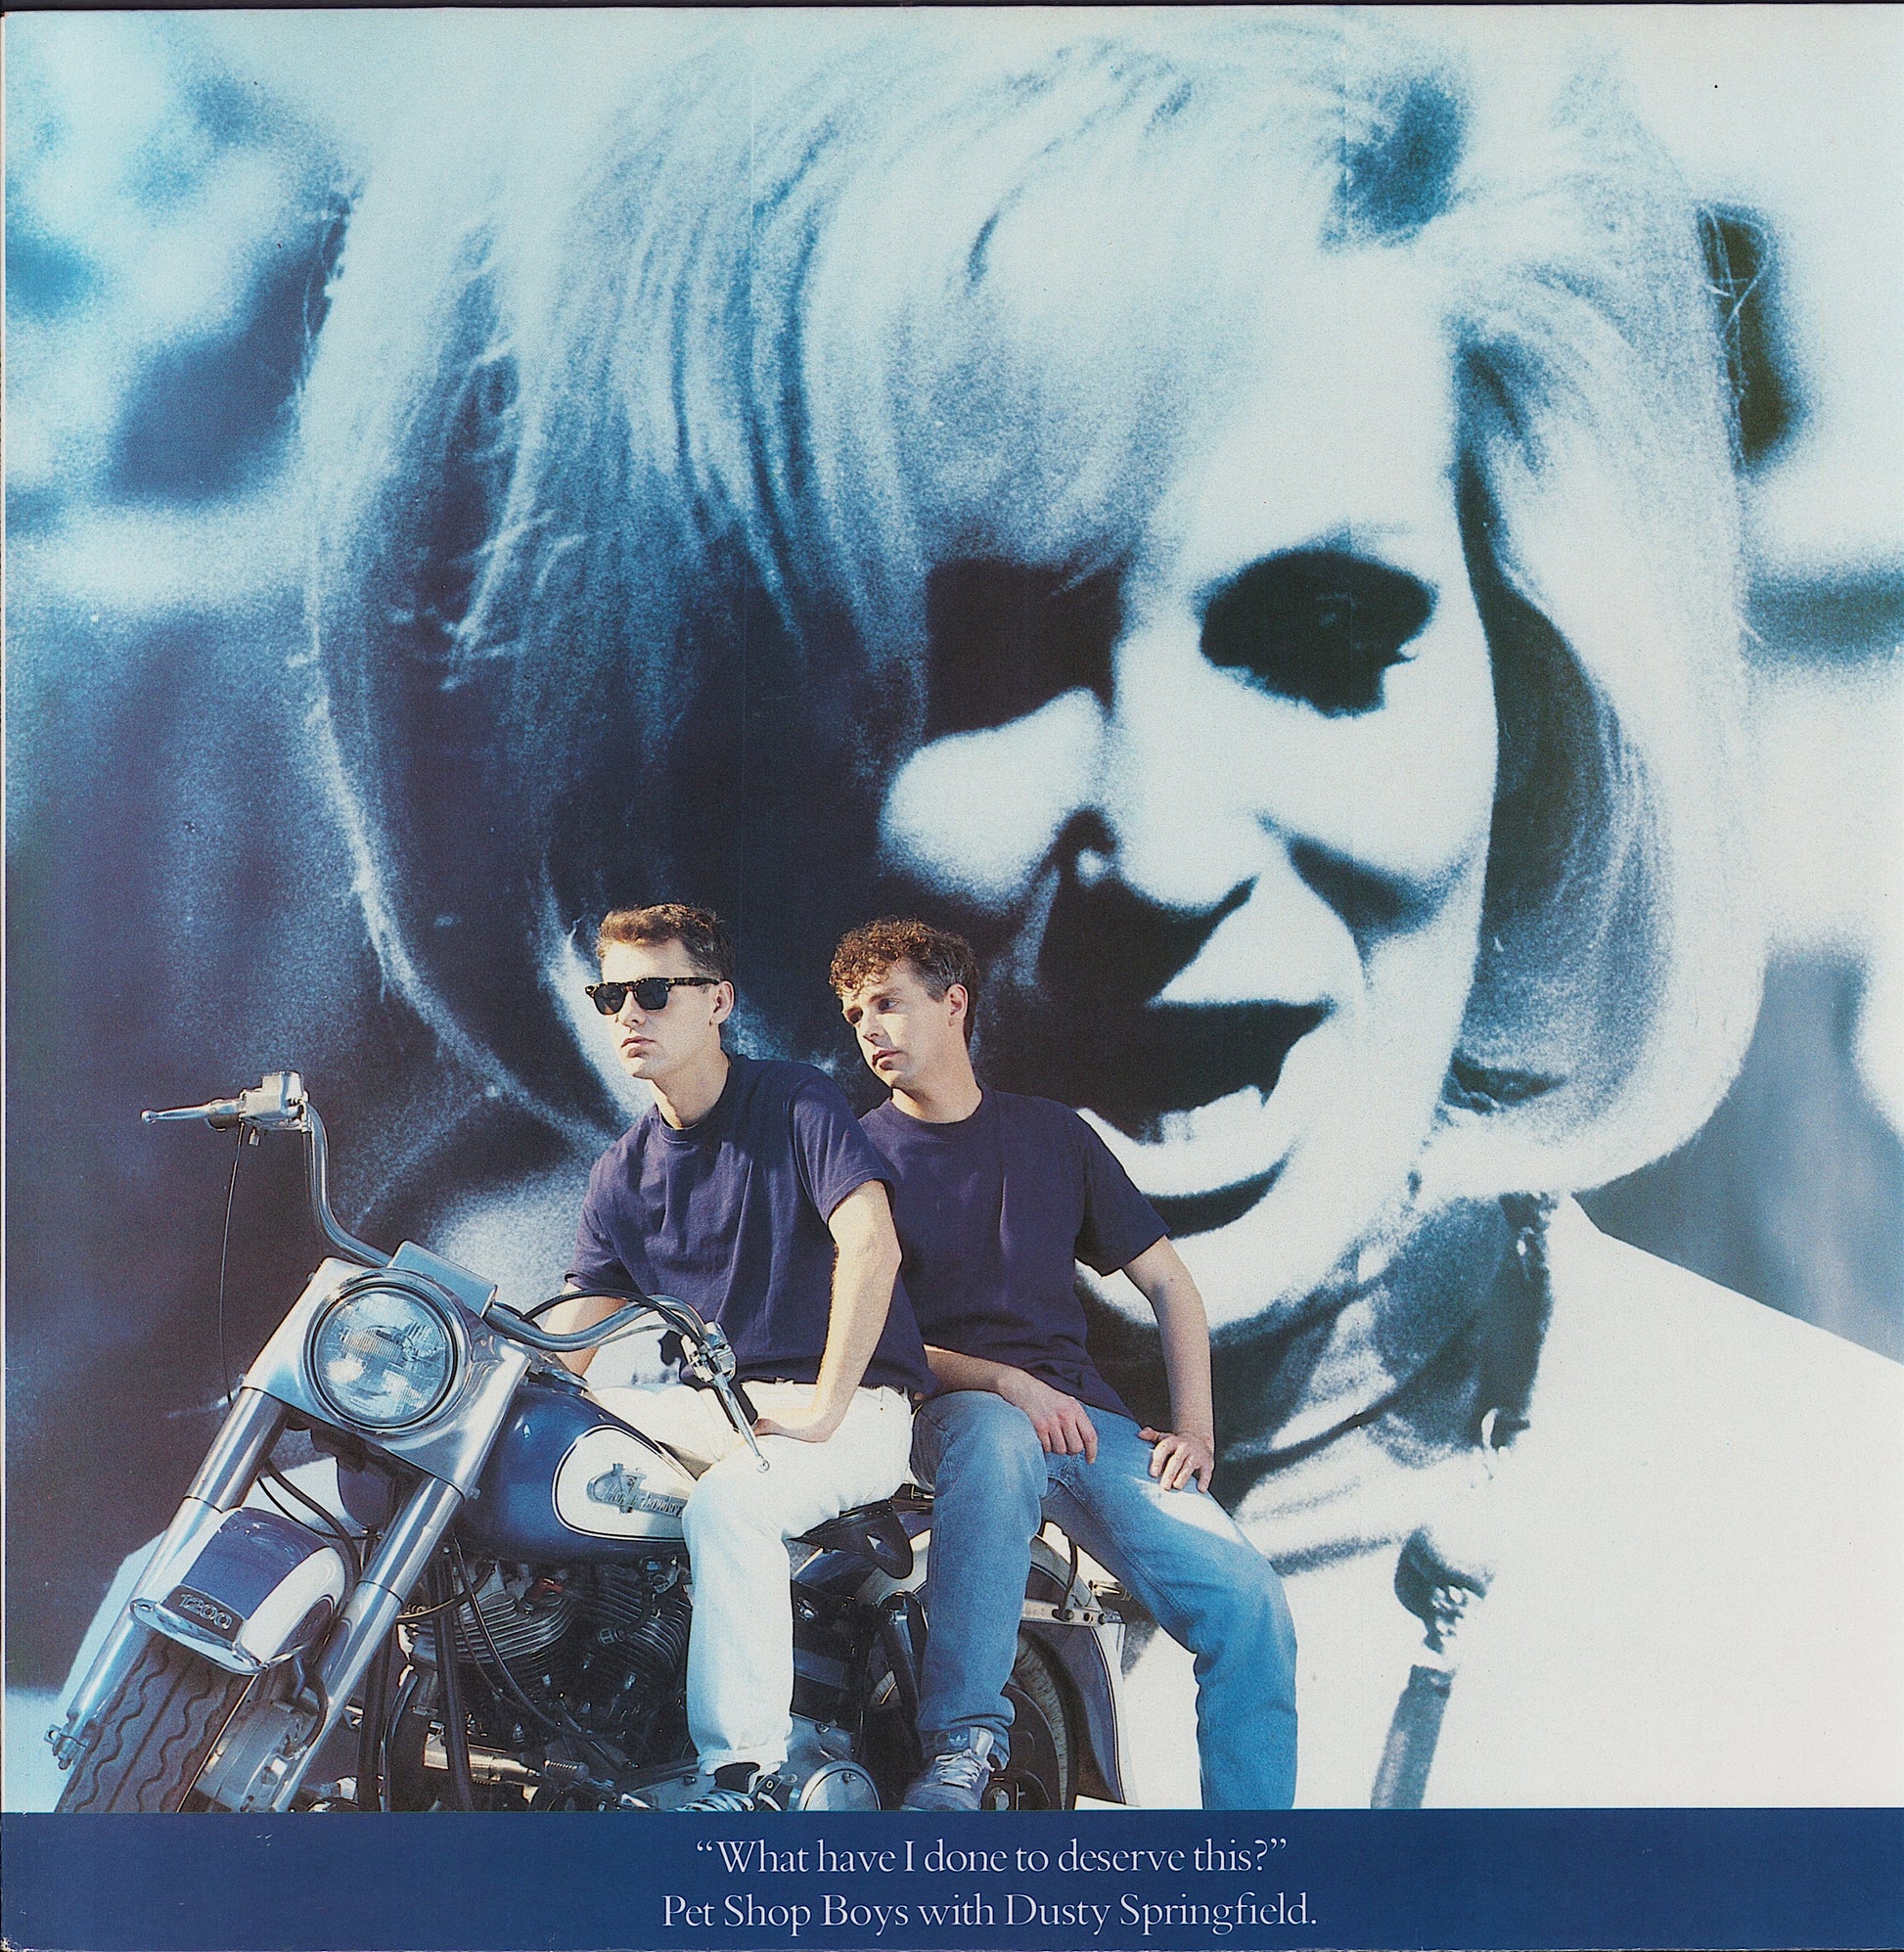 Pet Shop Boys With Dusty Springfield ‎- What Have I Done To Deserve This? (Vinyl 12")